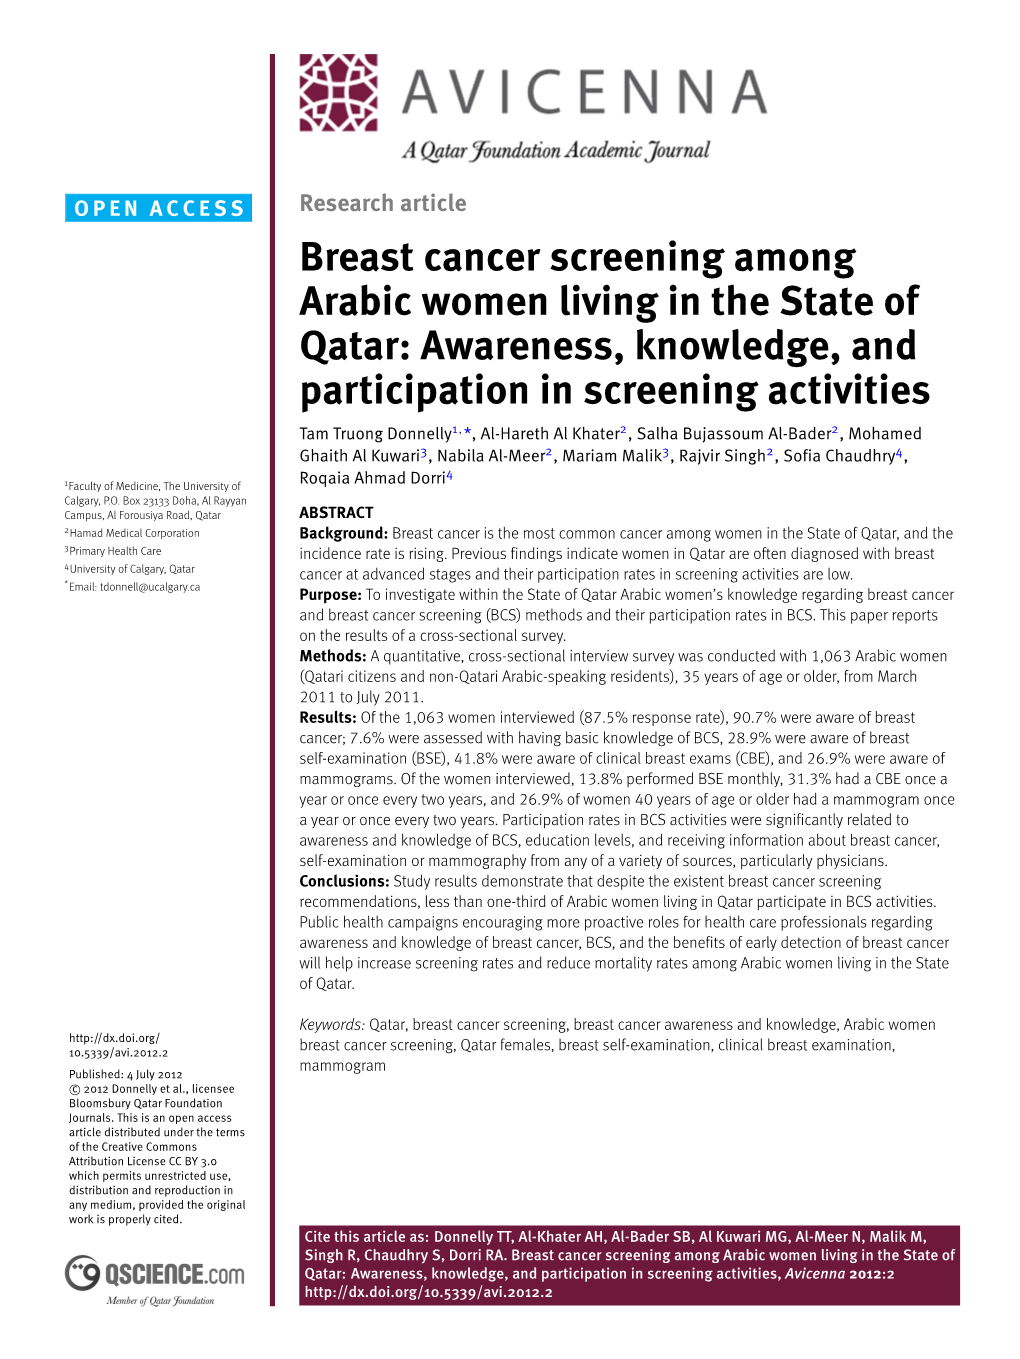 Breast Cancer Screening Among Arabic Women Living in the State Of